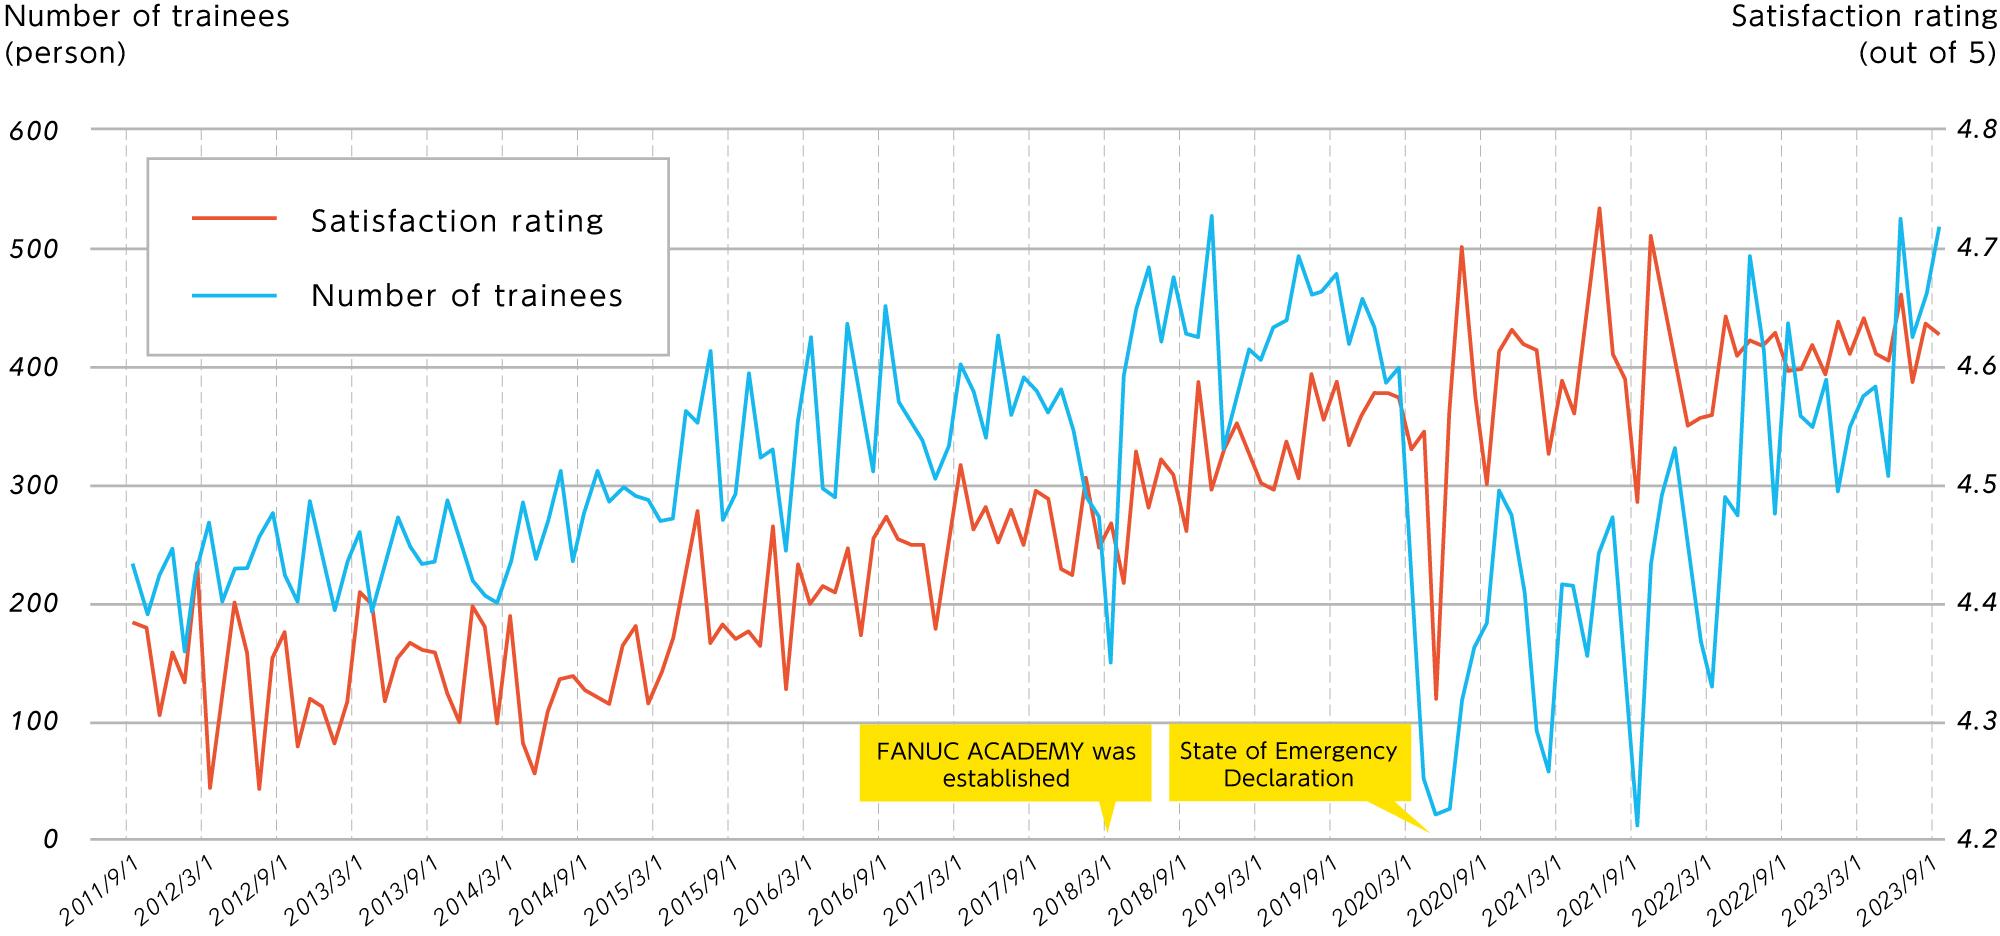 FANUC ACADEMY's Satisfaction Rating and Number of Trainees